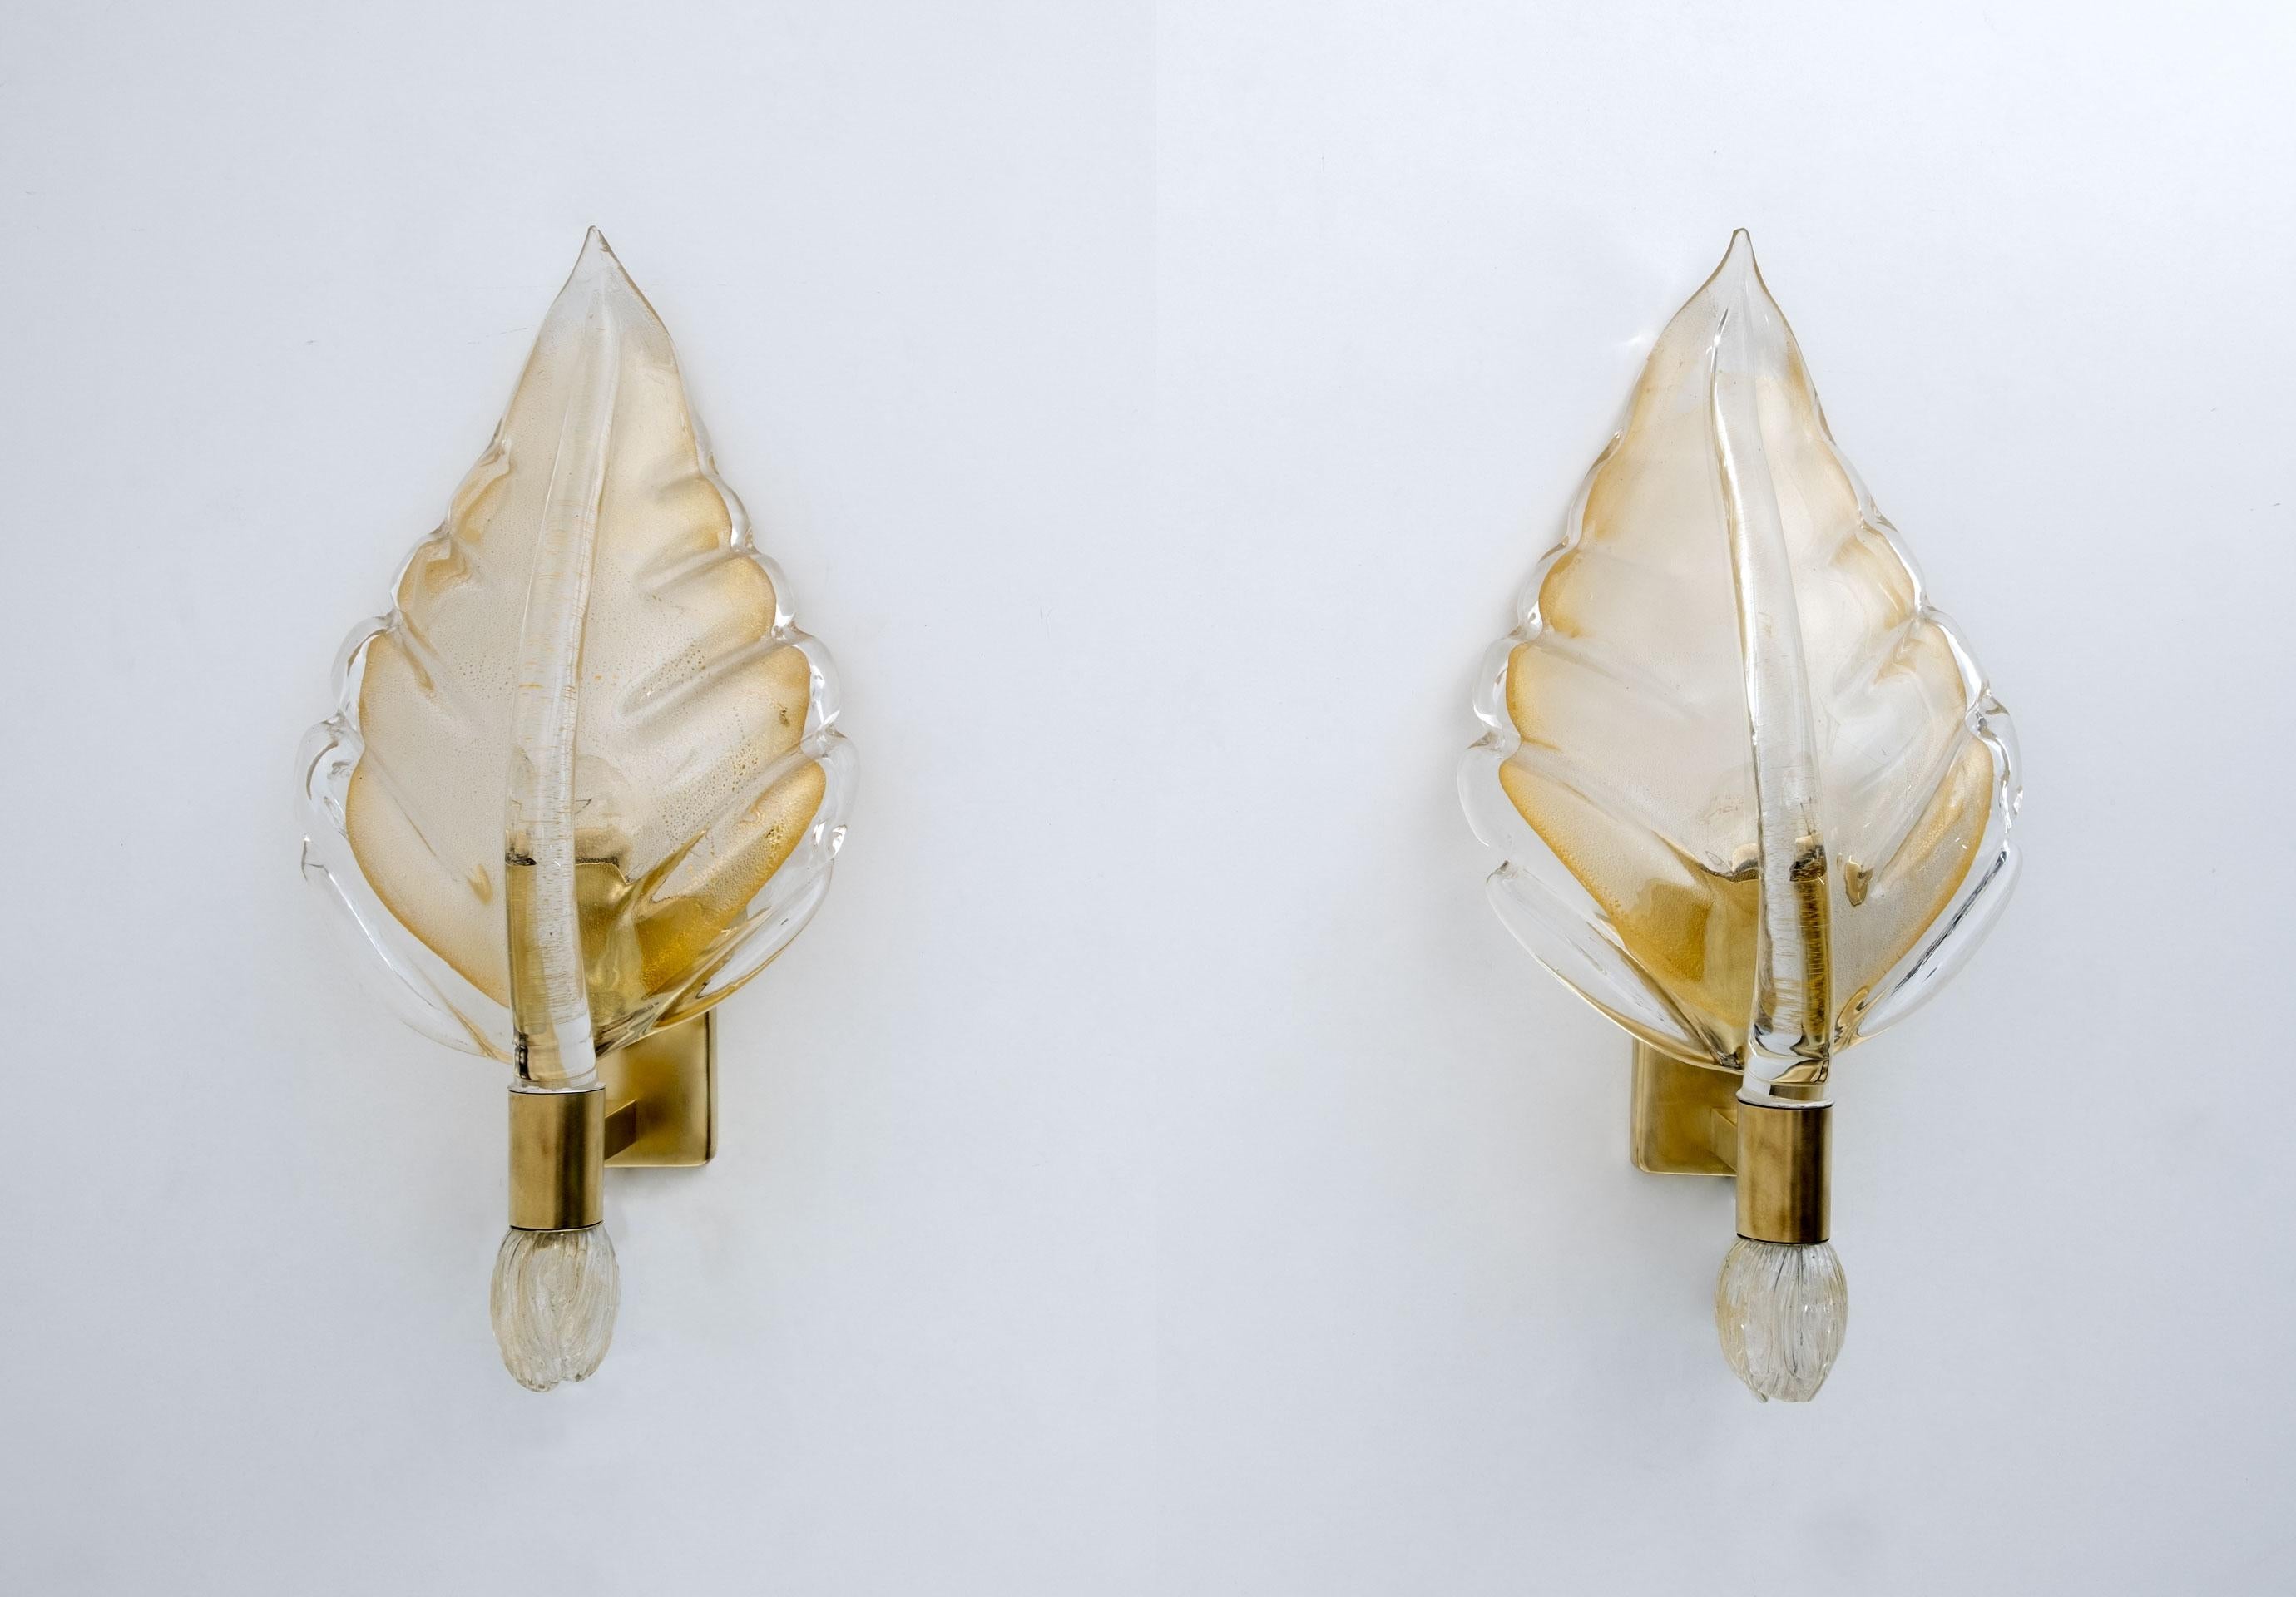 Pair of leaf-shaped appliques in Murano glass attributed to Tomaso Buzzi for Venini Italia, 1950. Pulegoso glass and filigree glass with gold dust, mounted on a brass structure. Produced by Venini & C., Murano, Italy in 1950.
We polished the brass.